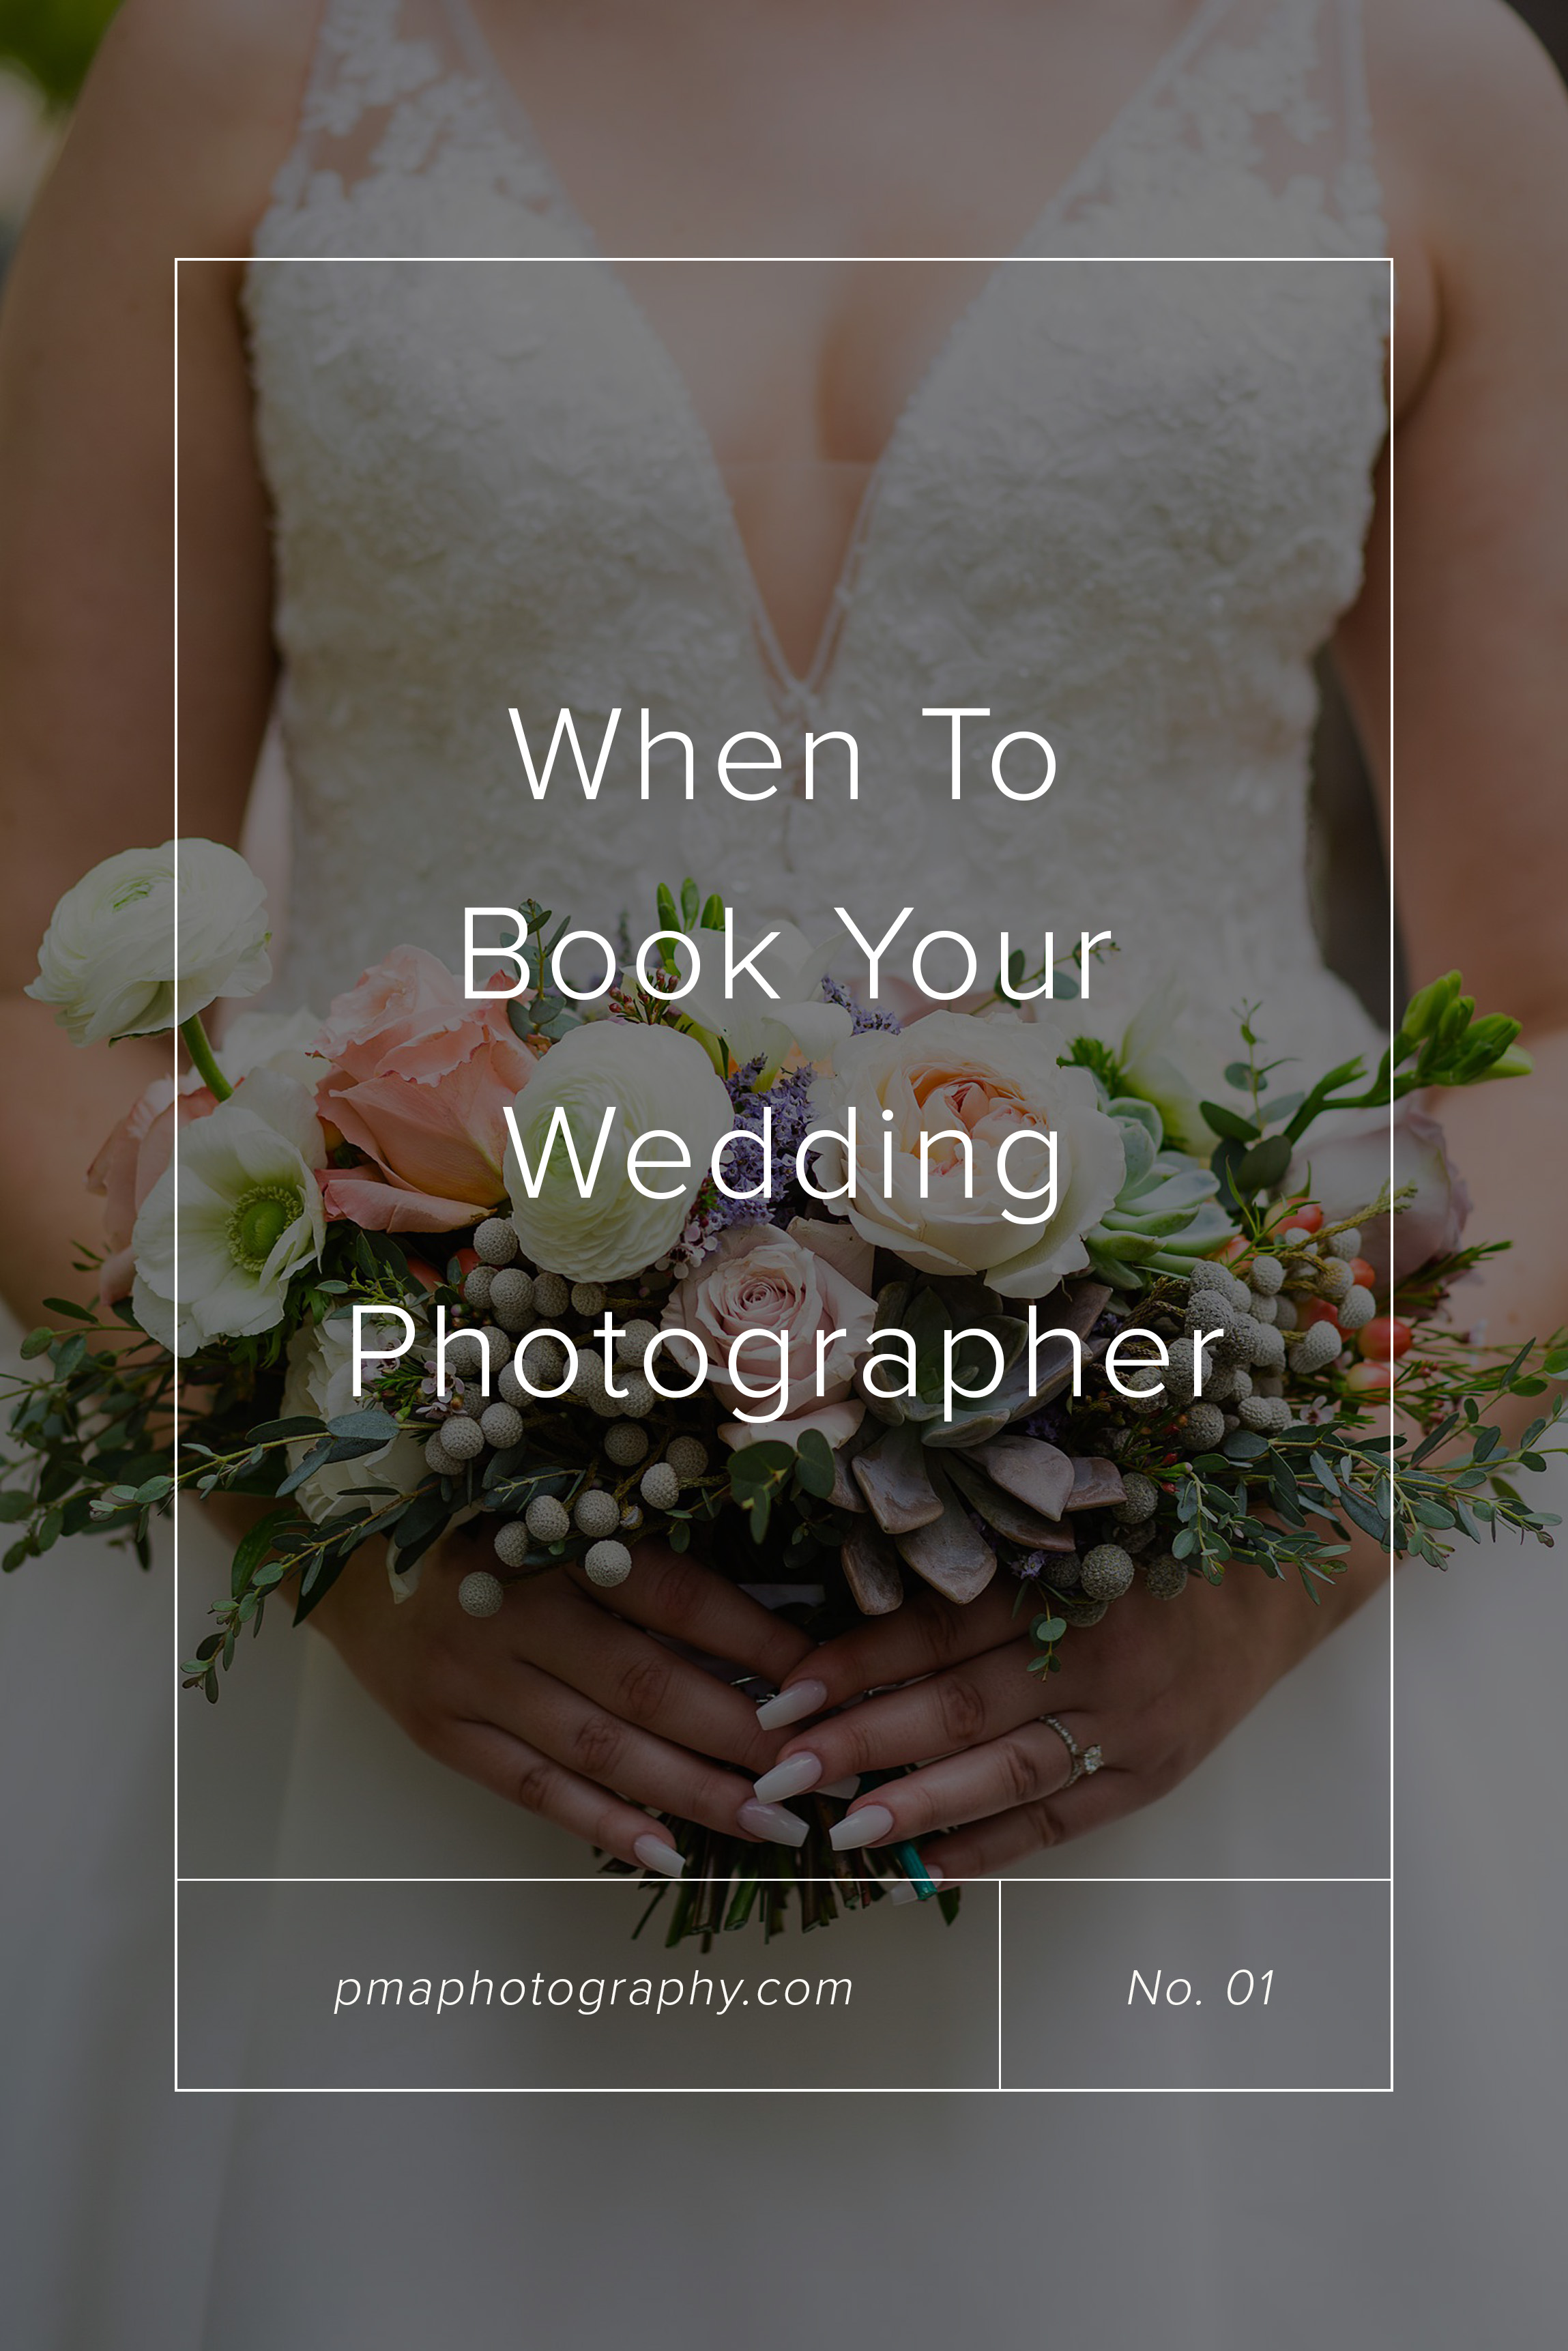 When to Book Your Wedding Photographer Pinterest Image